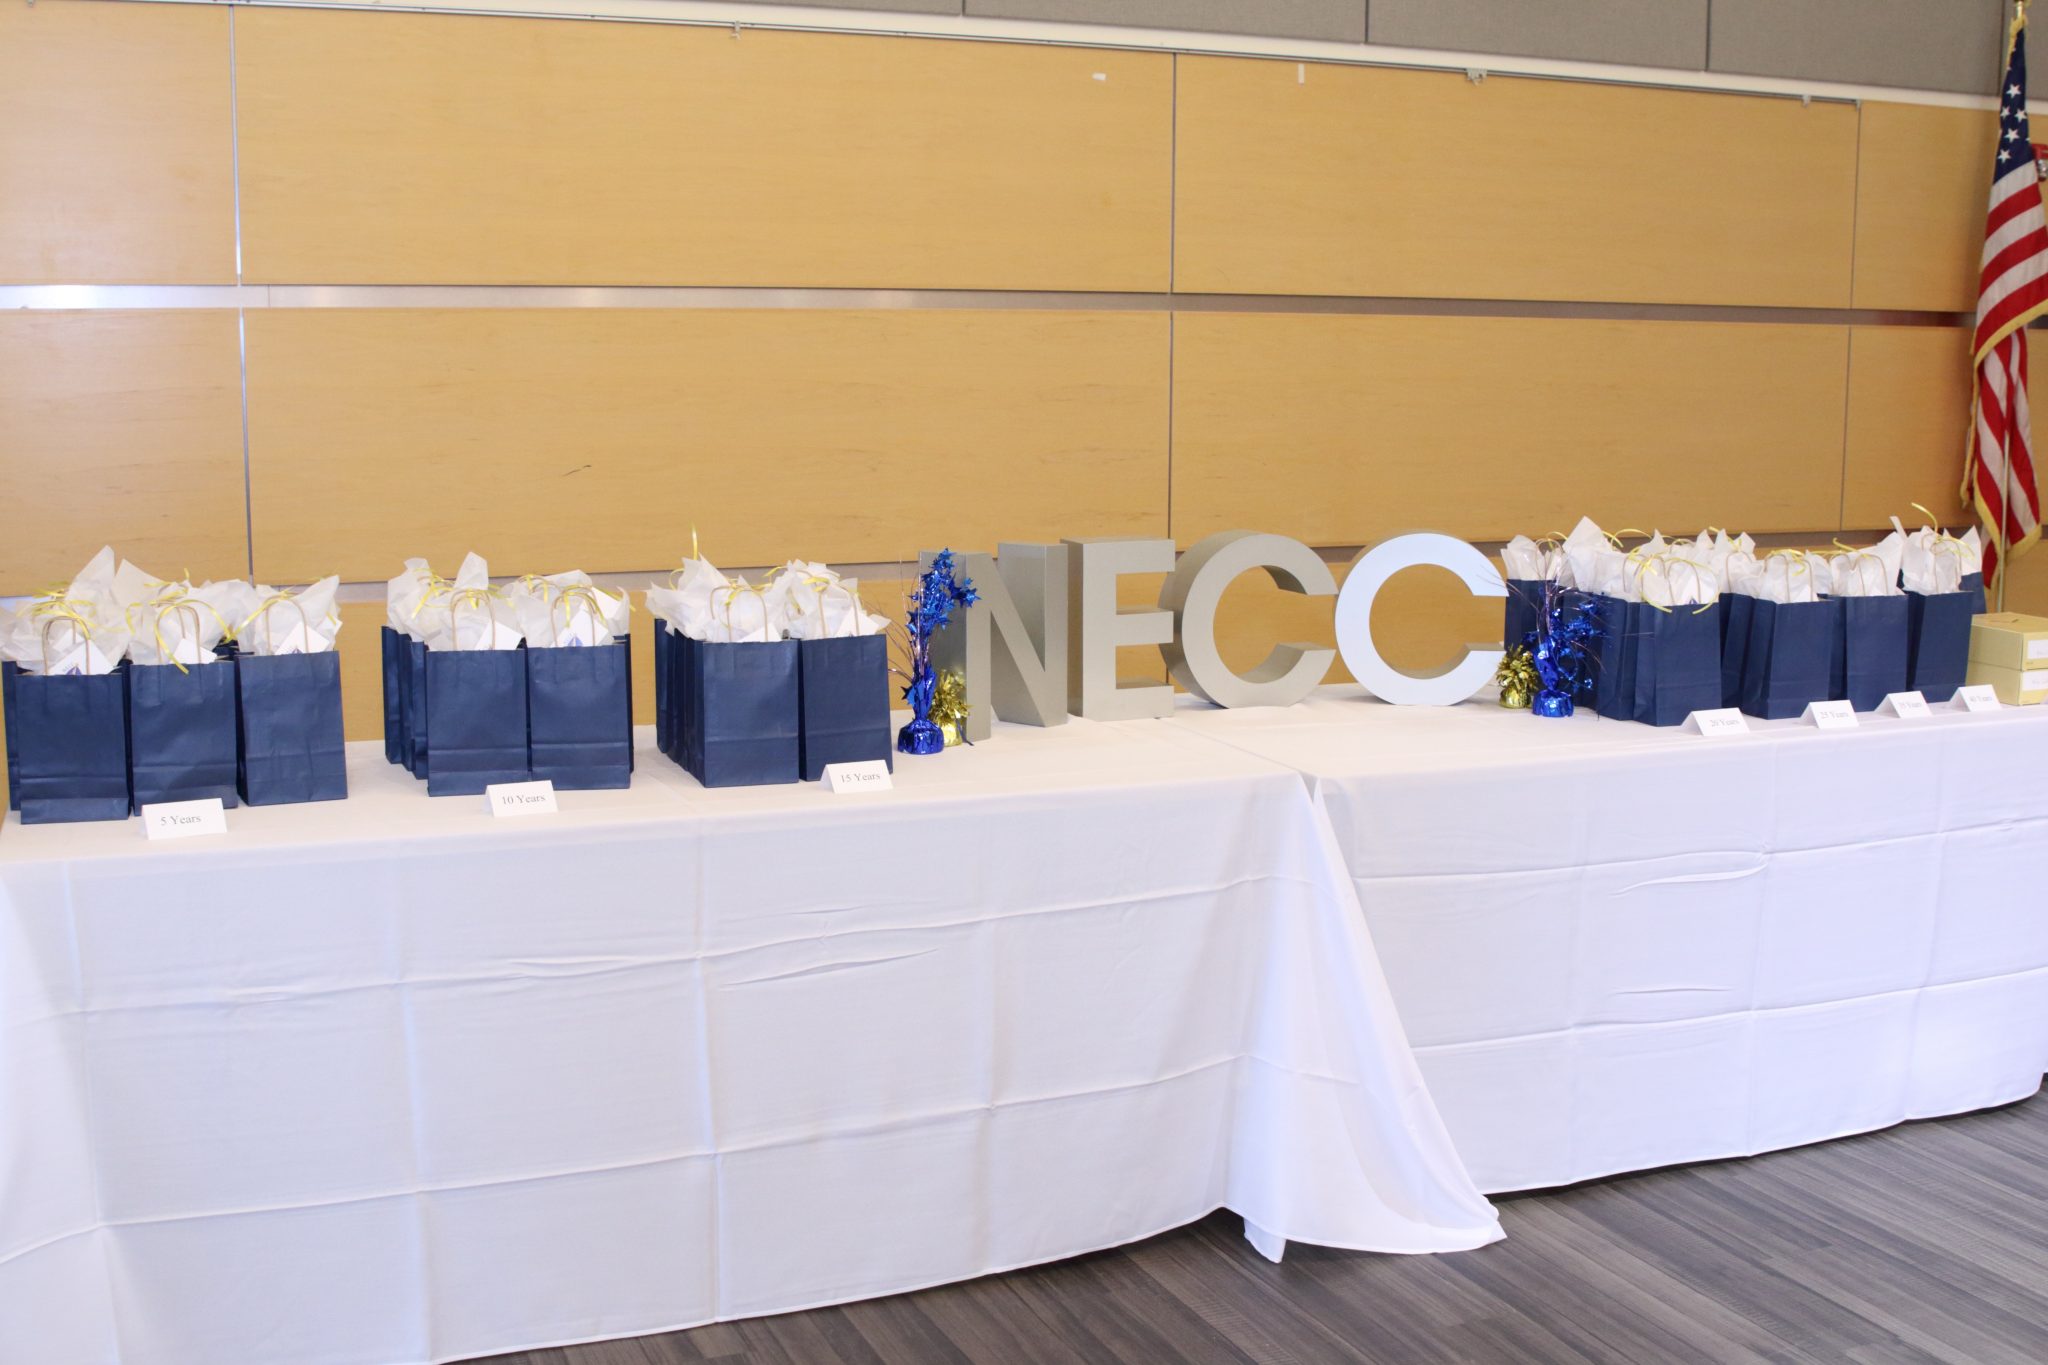 cloth covered table with blue gift bags and silver letters NECC